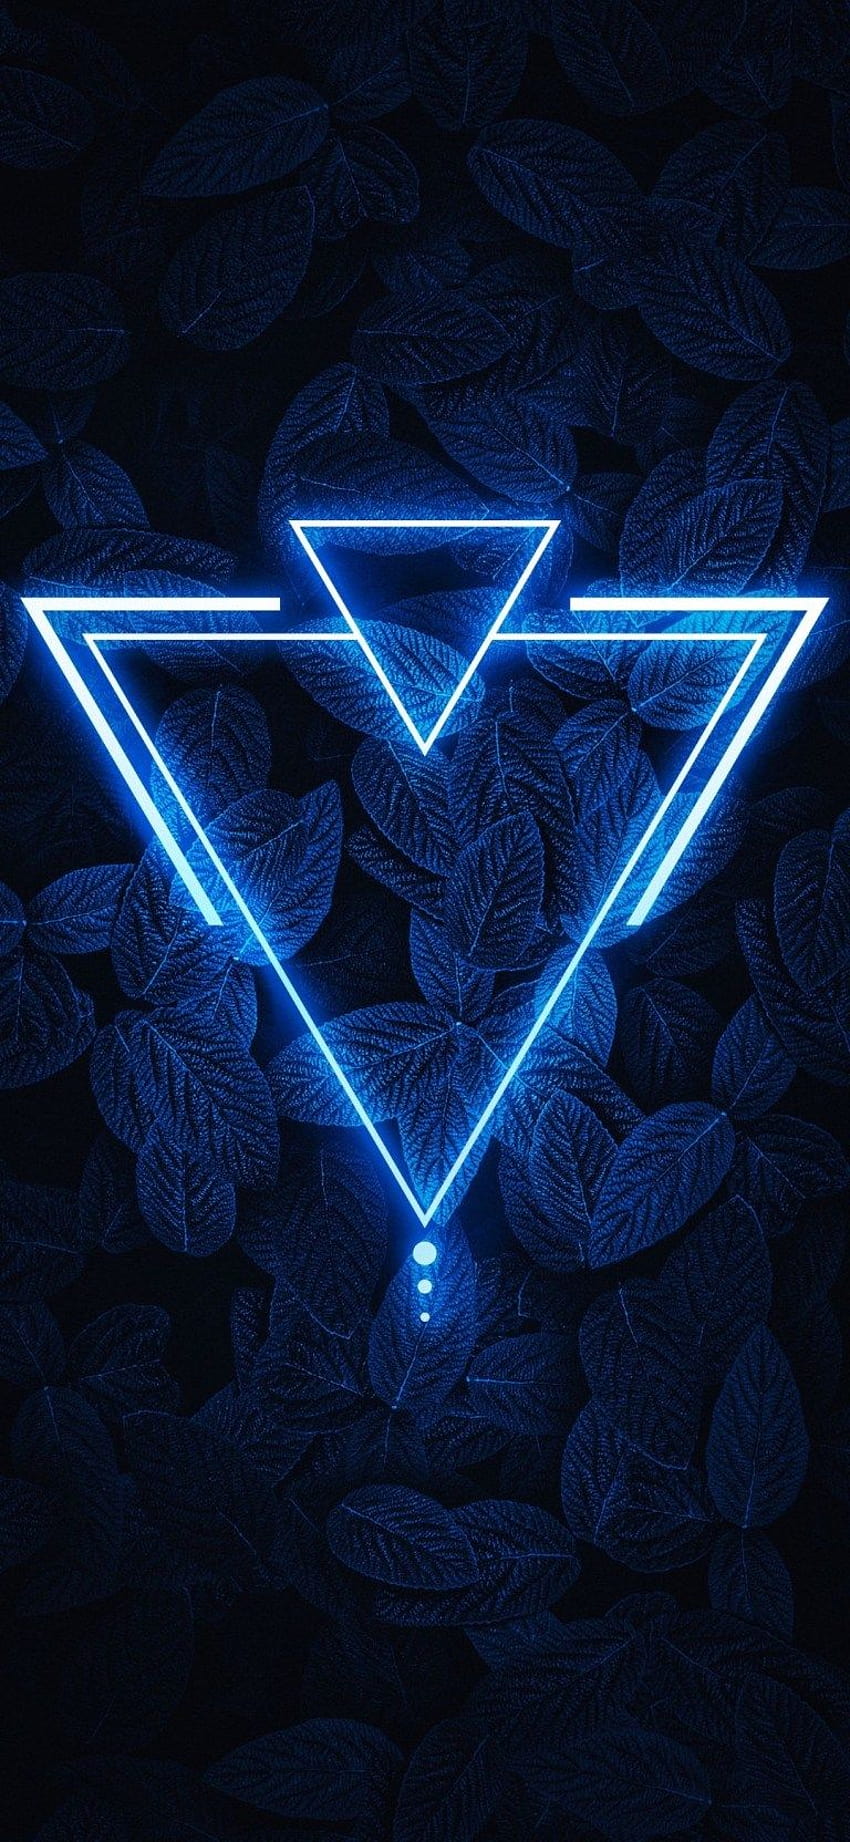 Neon Triangle Leaf Backgrounds for Samsung Galaxy S20 Ultra 5G, amoled leaf HD phone wallpaper